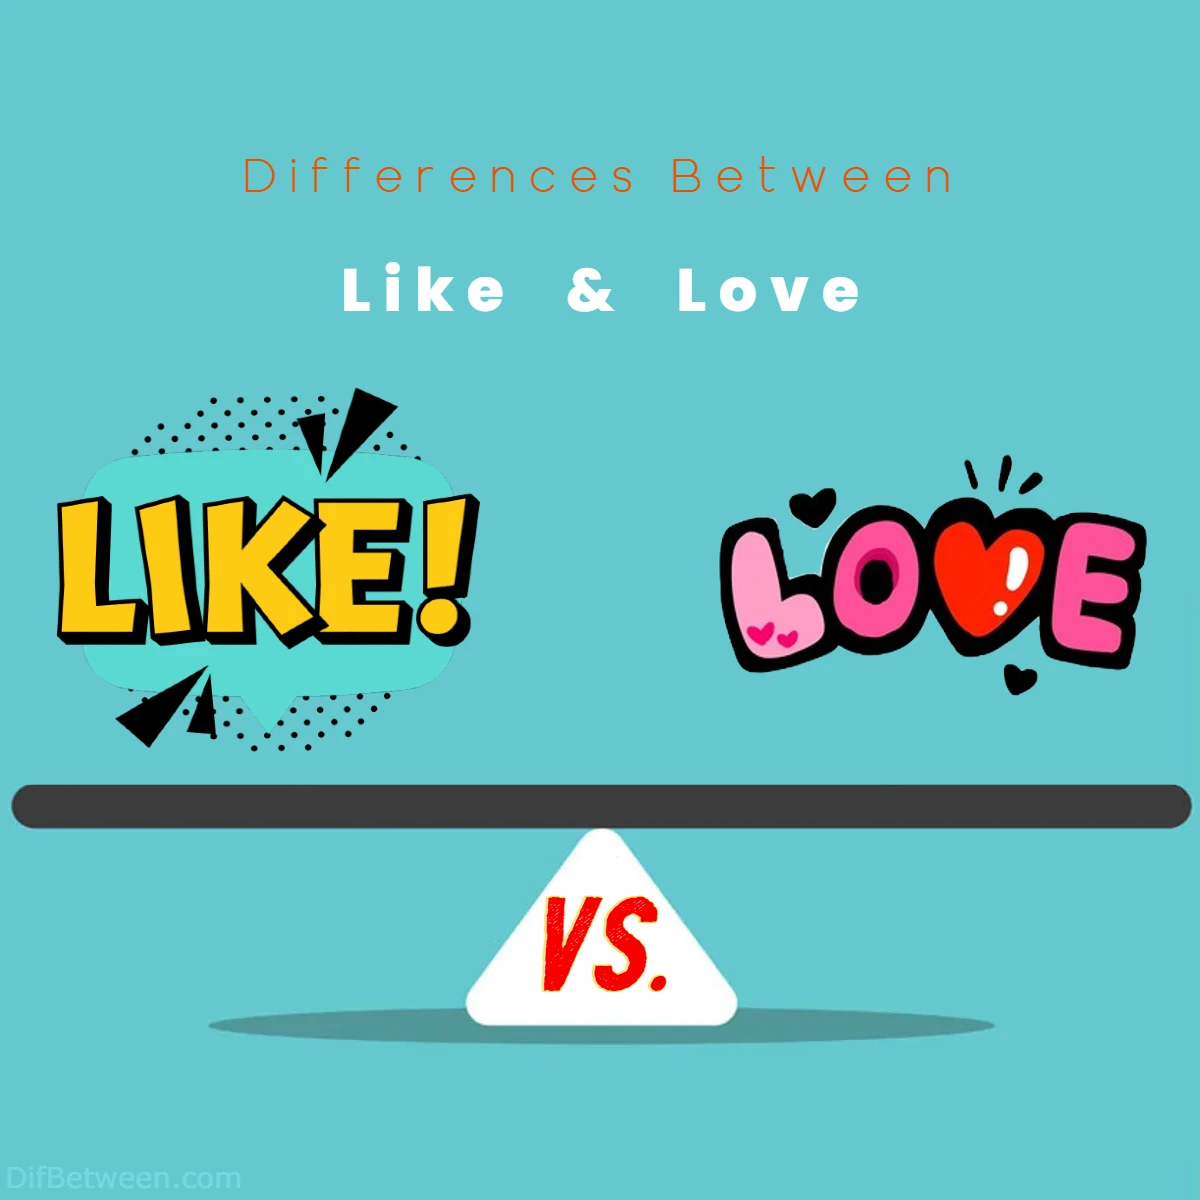 Differences Between Like vs Love